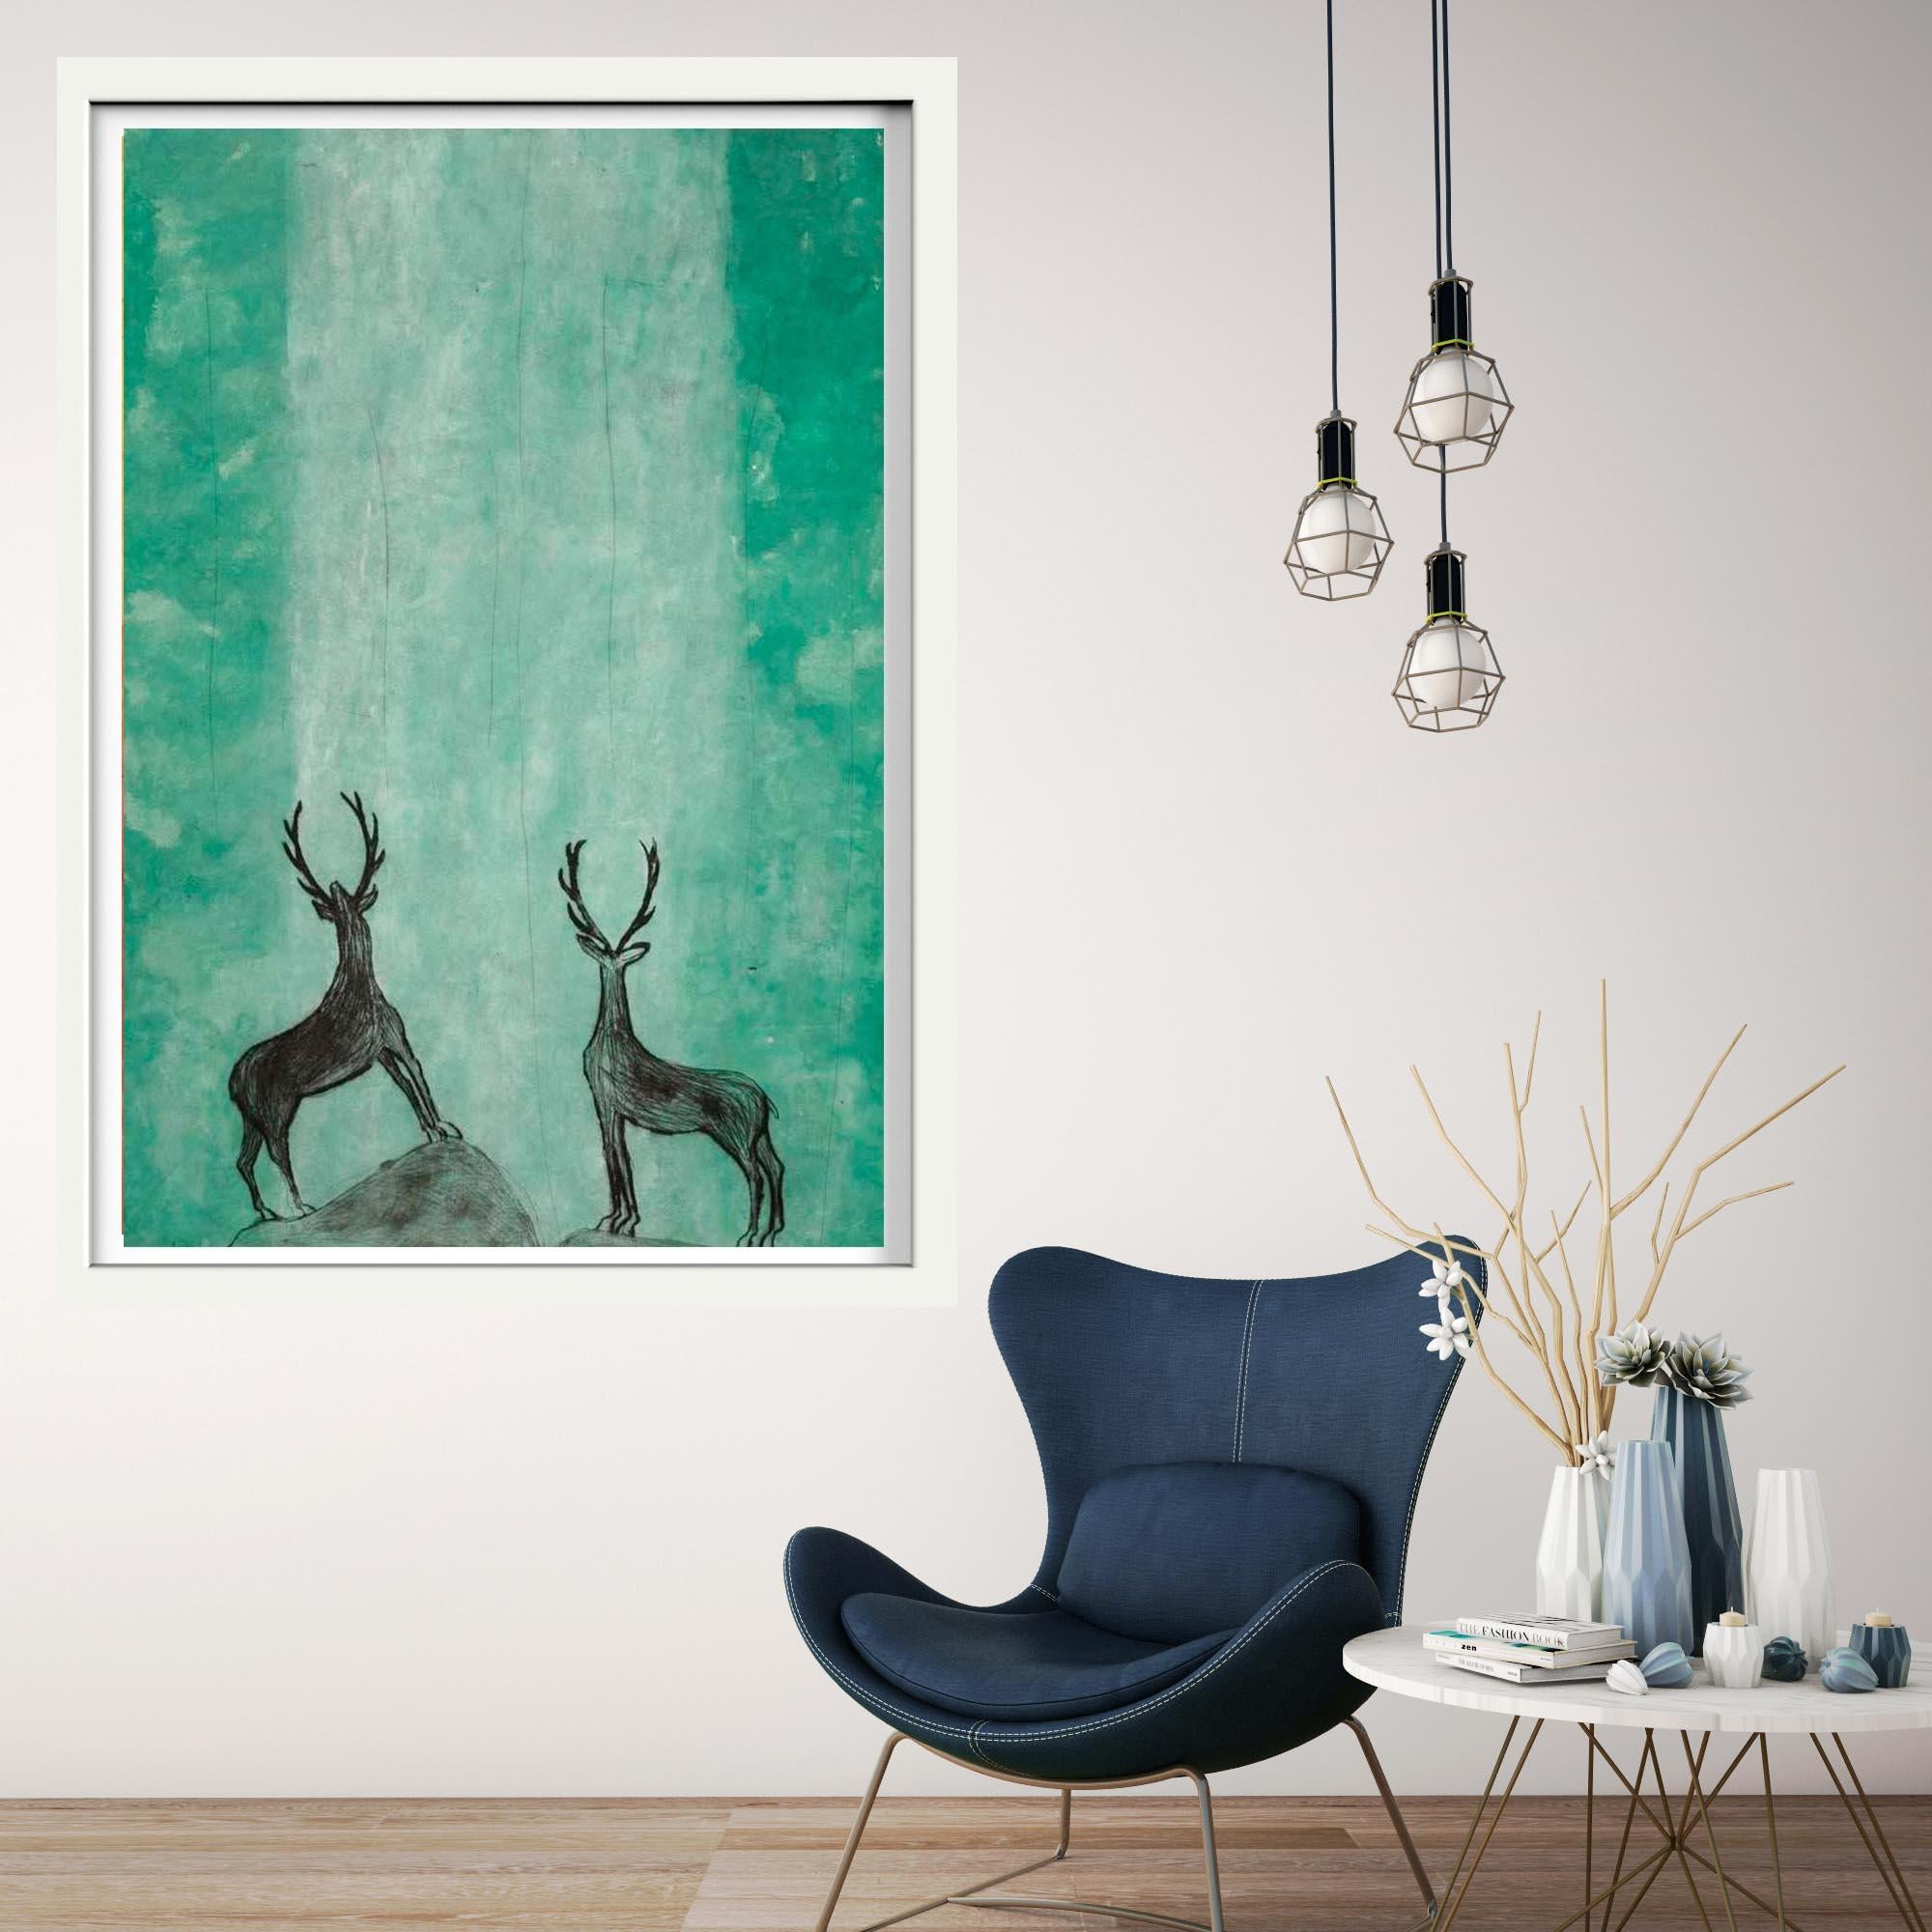 Kate Boxer
Stags Admiring a Waterfall
Limited Edition Drypoint
Paper Size: 76 x 104 cm
(Please note that in situ images are purely an indication of how a piece may look).

Stags Admiring a Waterfall is an emerald green contemporary print by Kate